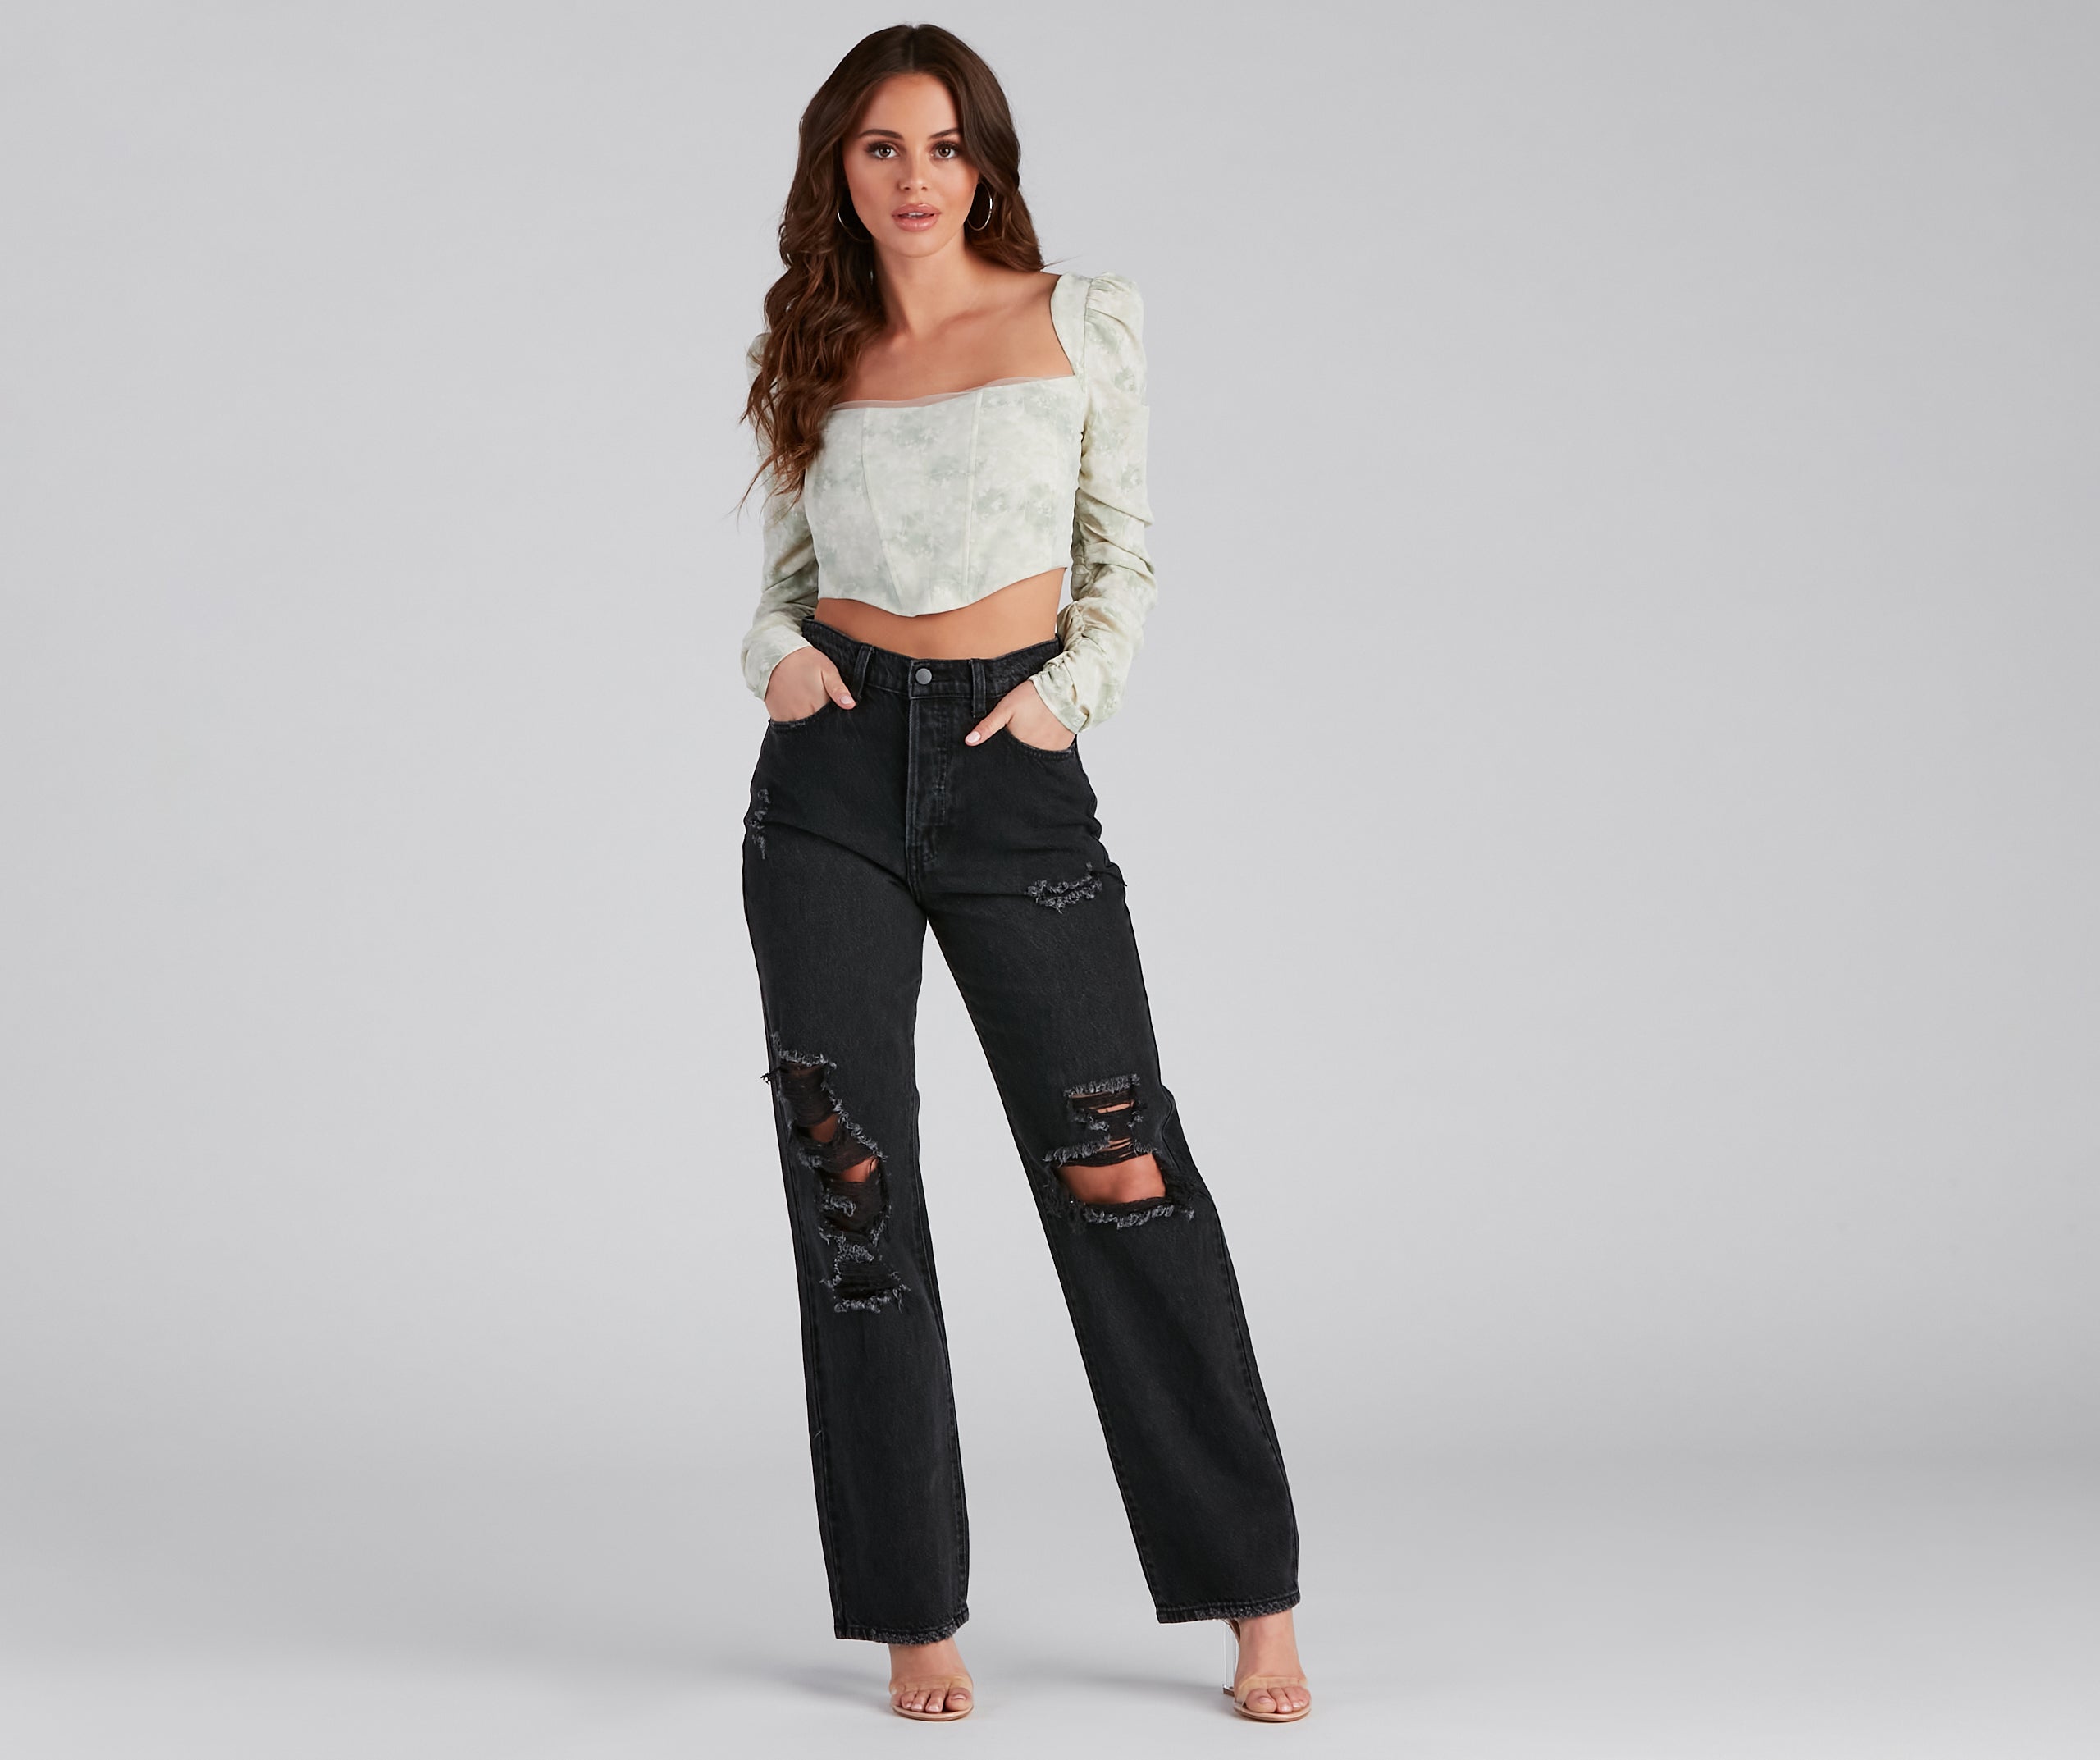 Distressed, But Well Dressed Boyfriend Jeans